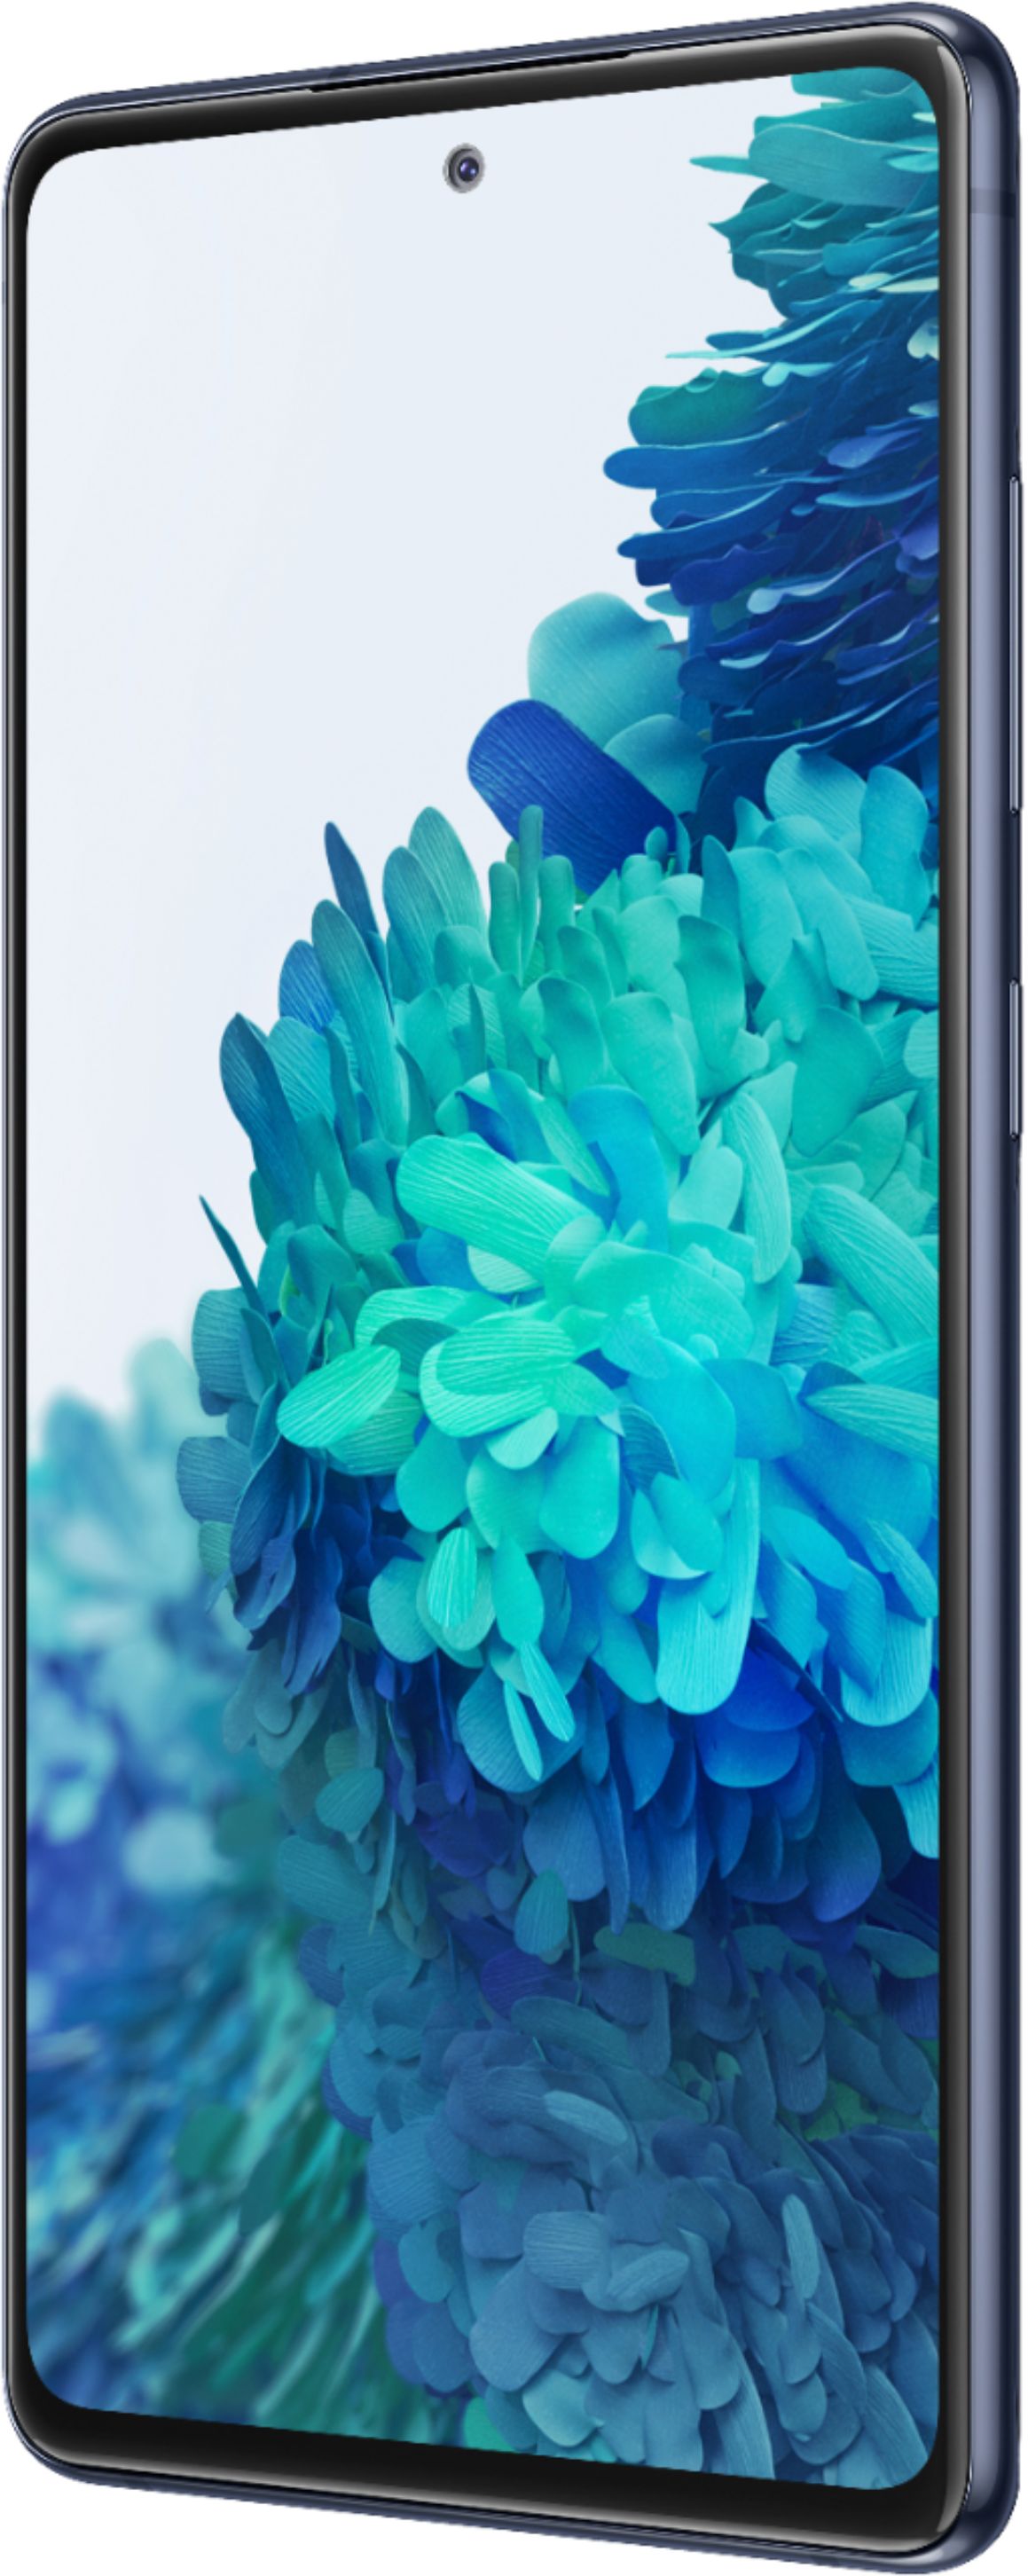 Samsung Galaxy S20 FE 5G: Get the Flagship Experience This Festive